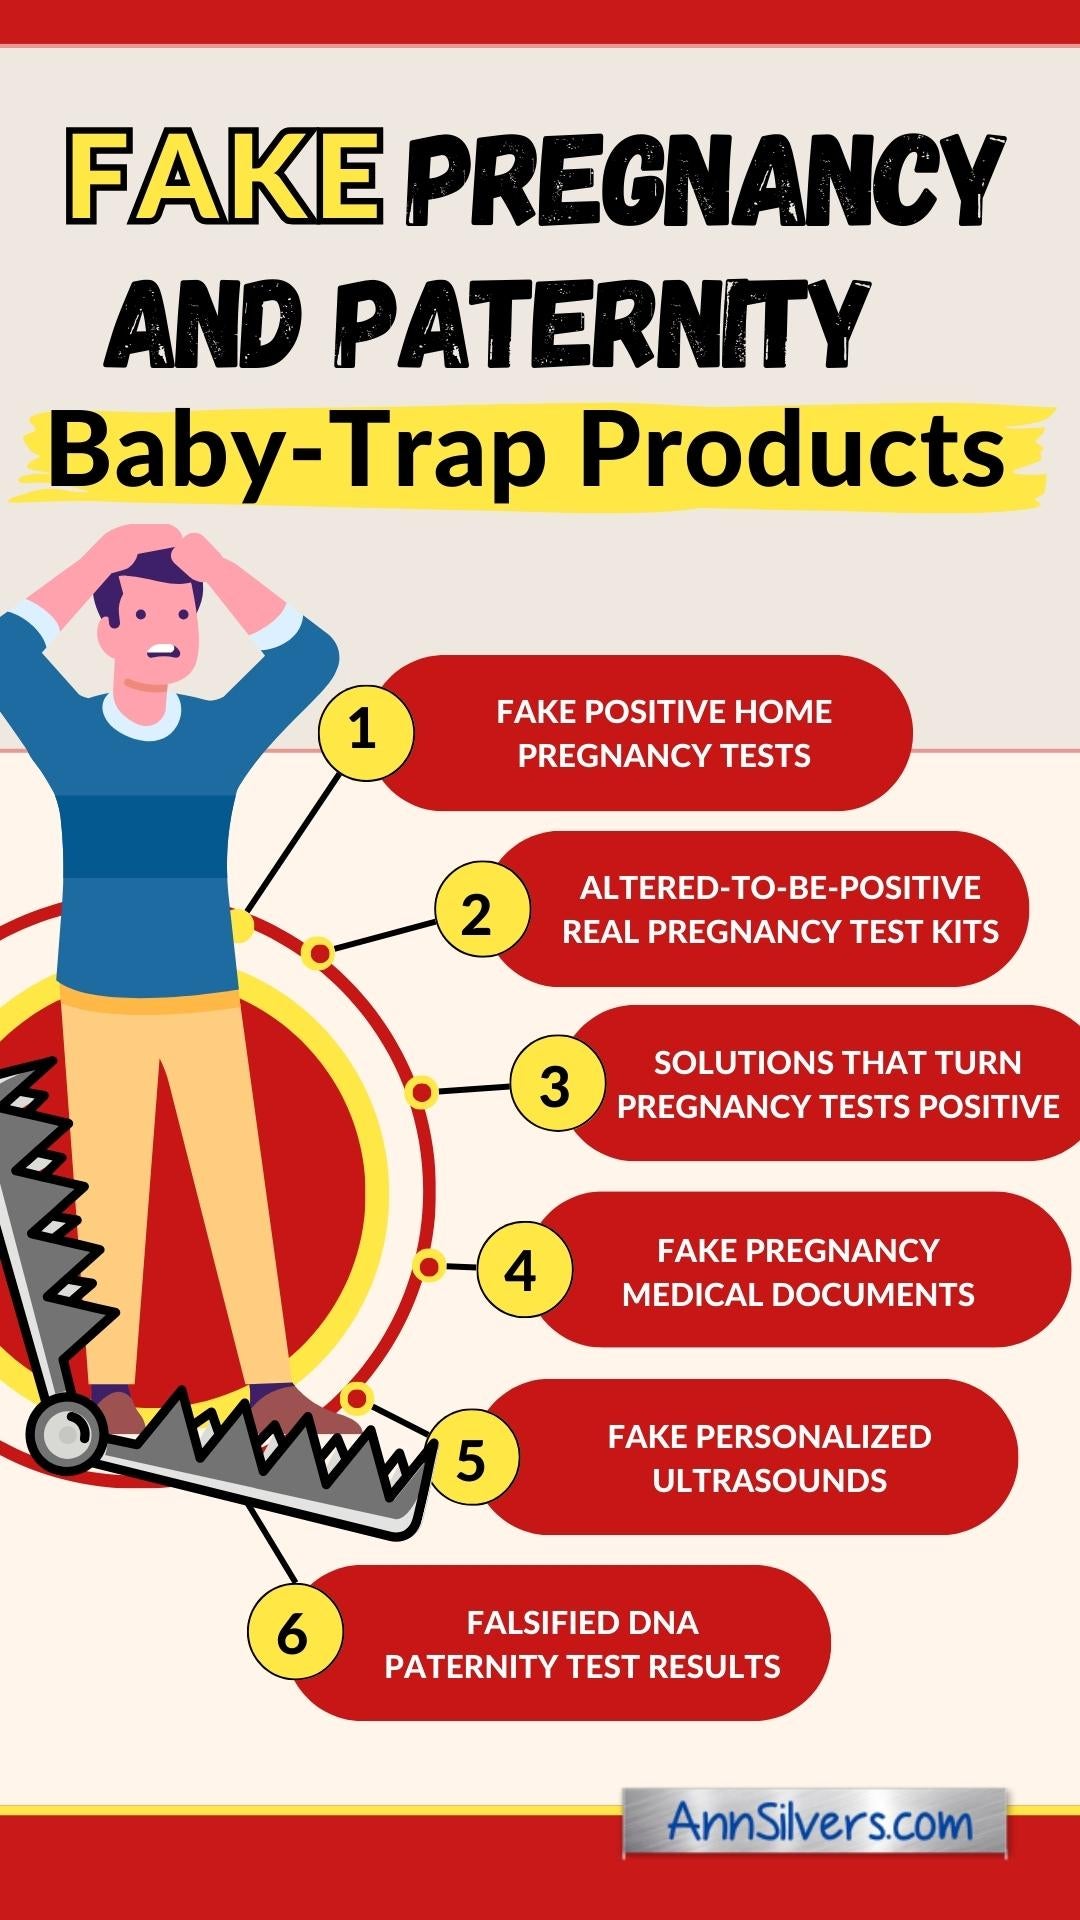 Fake Pregnancy and Paternity Baby Trap Products Infographic